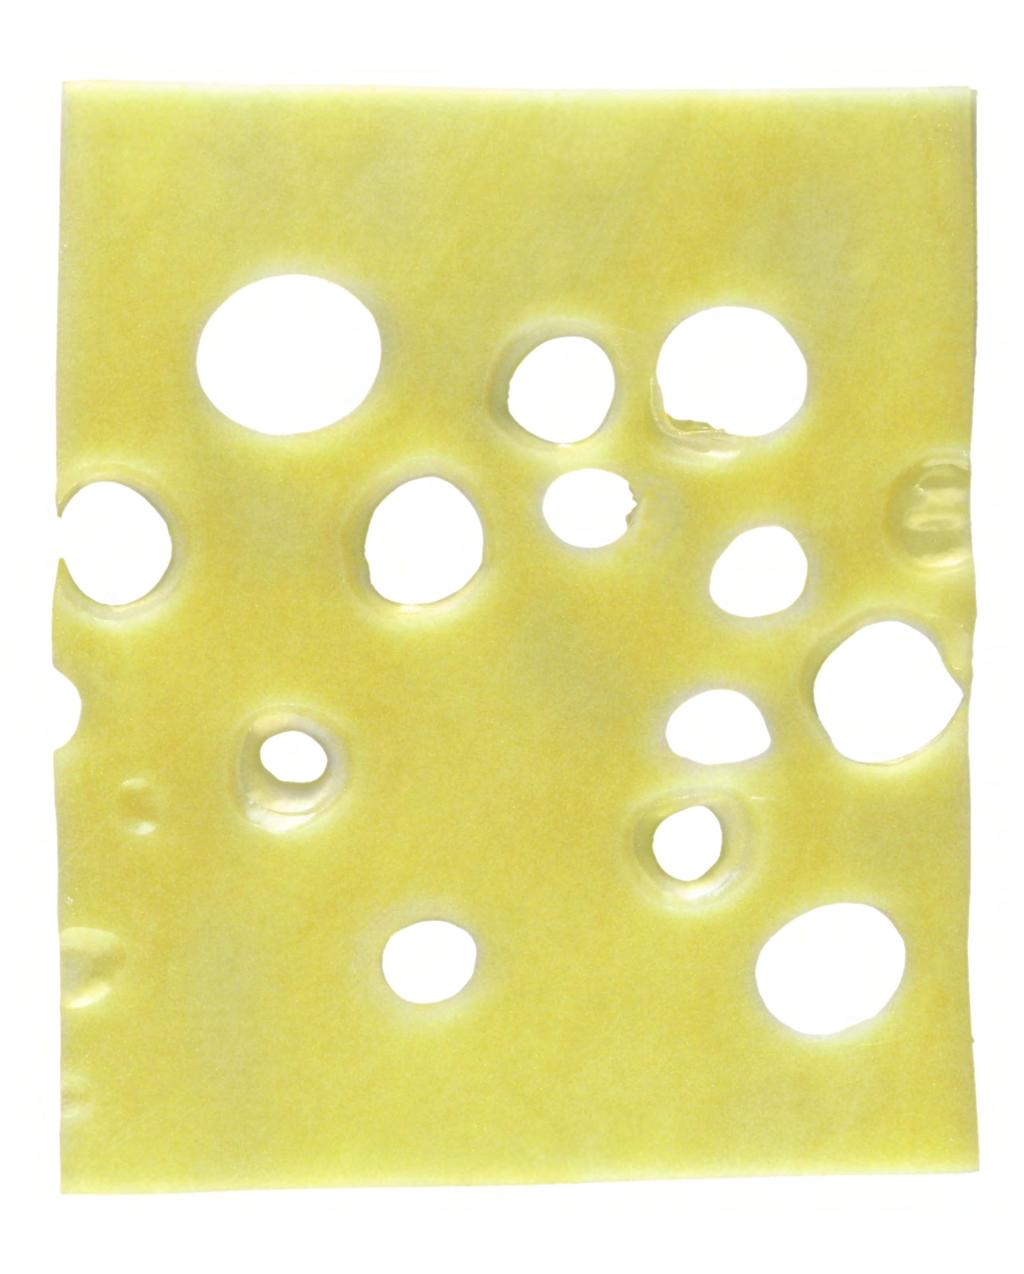 58 E O D Y WH CHEEE I W HOLE? E V HA T he holes in wiss cheese come from bacteria that helps turn milk into cheese.